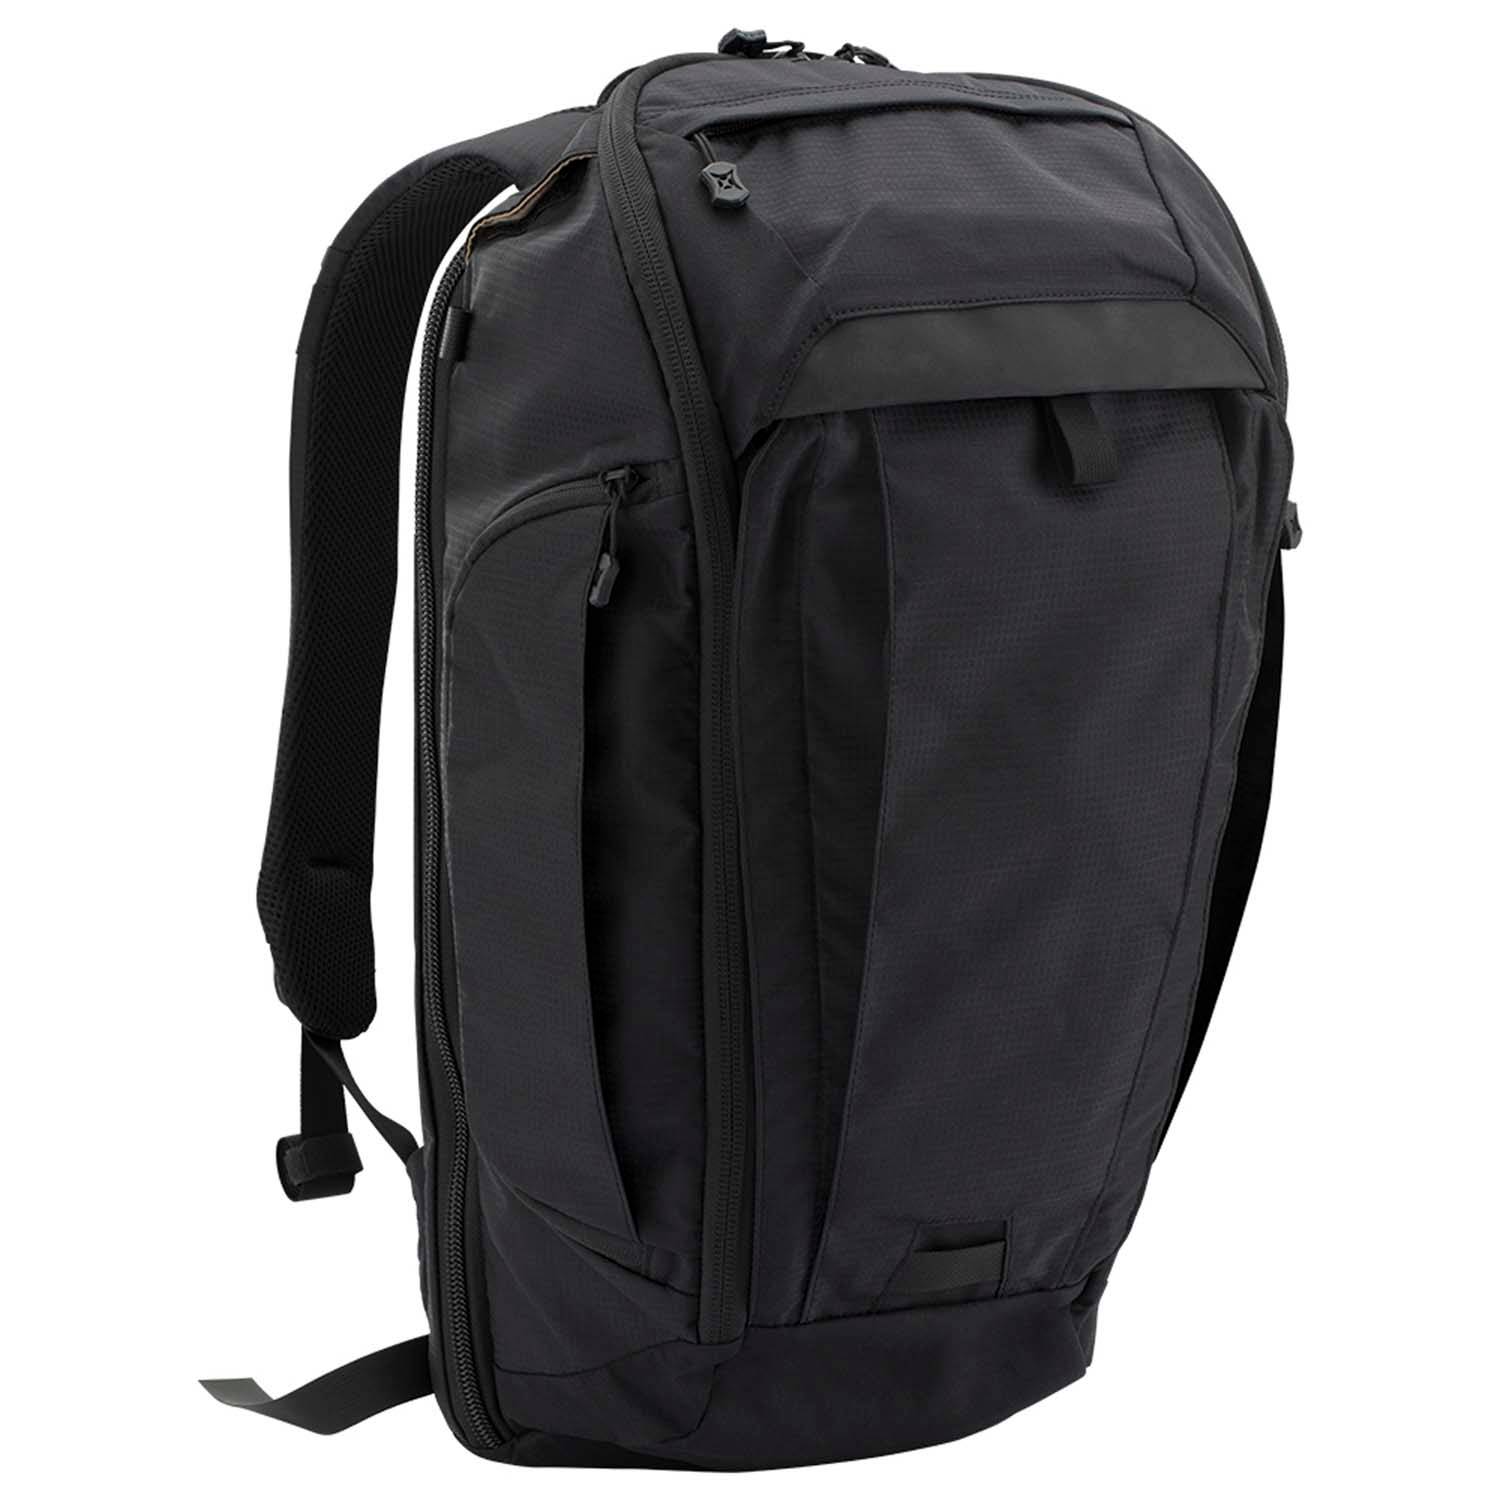 VERTX GAMUT CHECKPOINT PACK